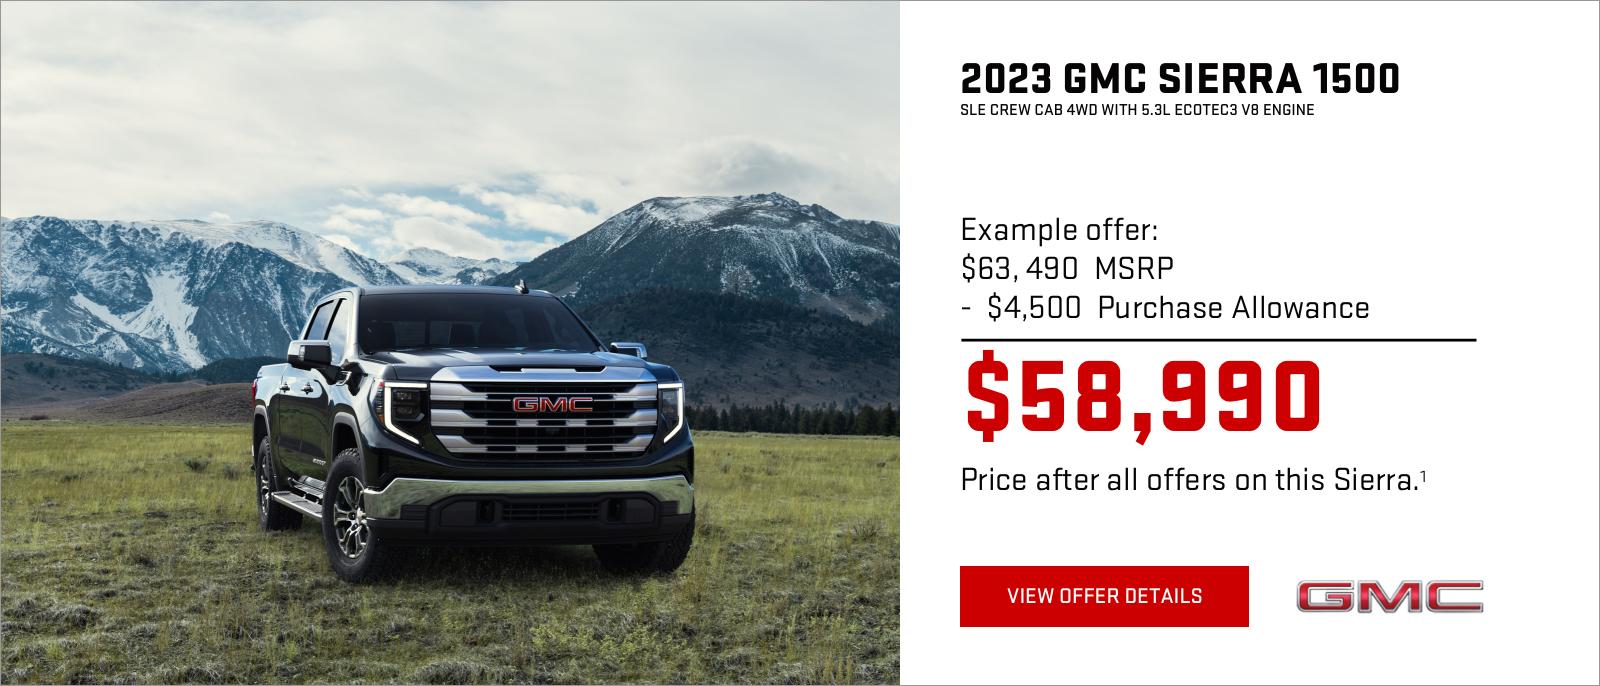 Example offer:
$63,490 MSRP
$4,500 Purchase Allowance
$58,990 Price after all offers on this Sierra.1